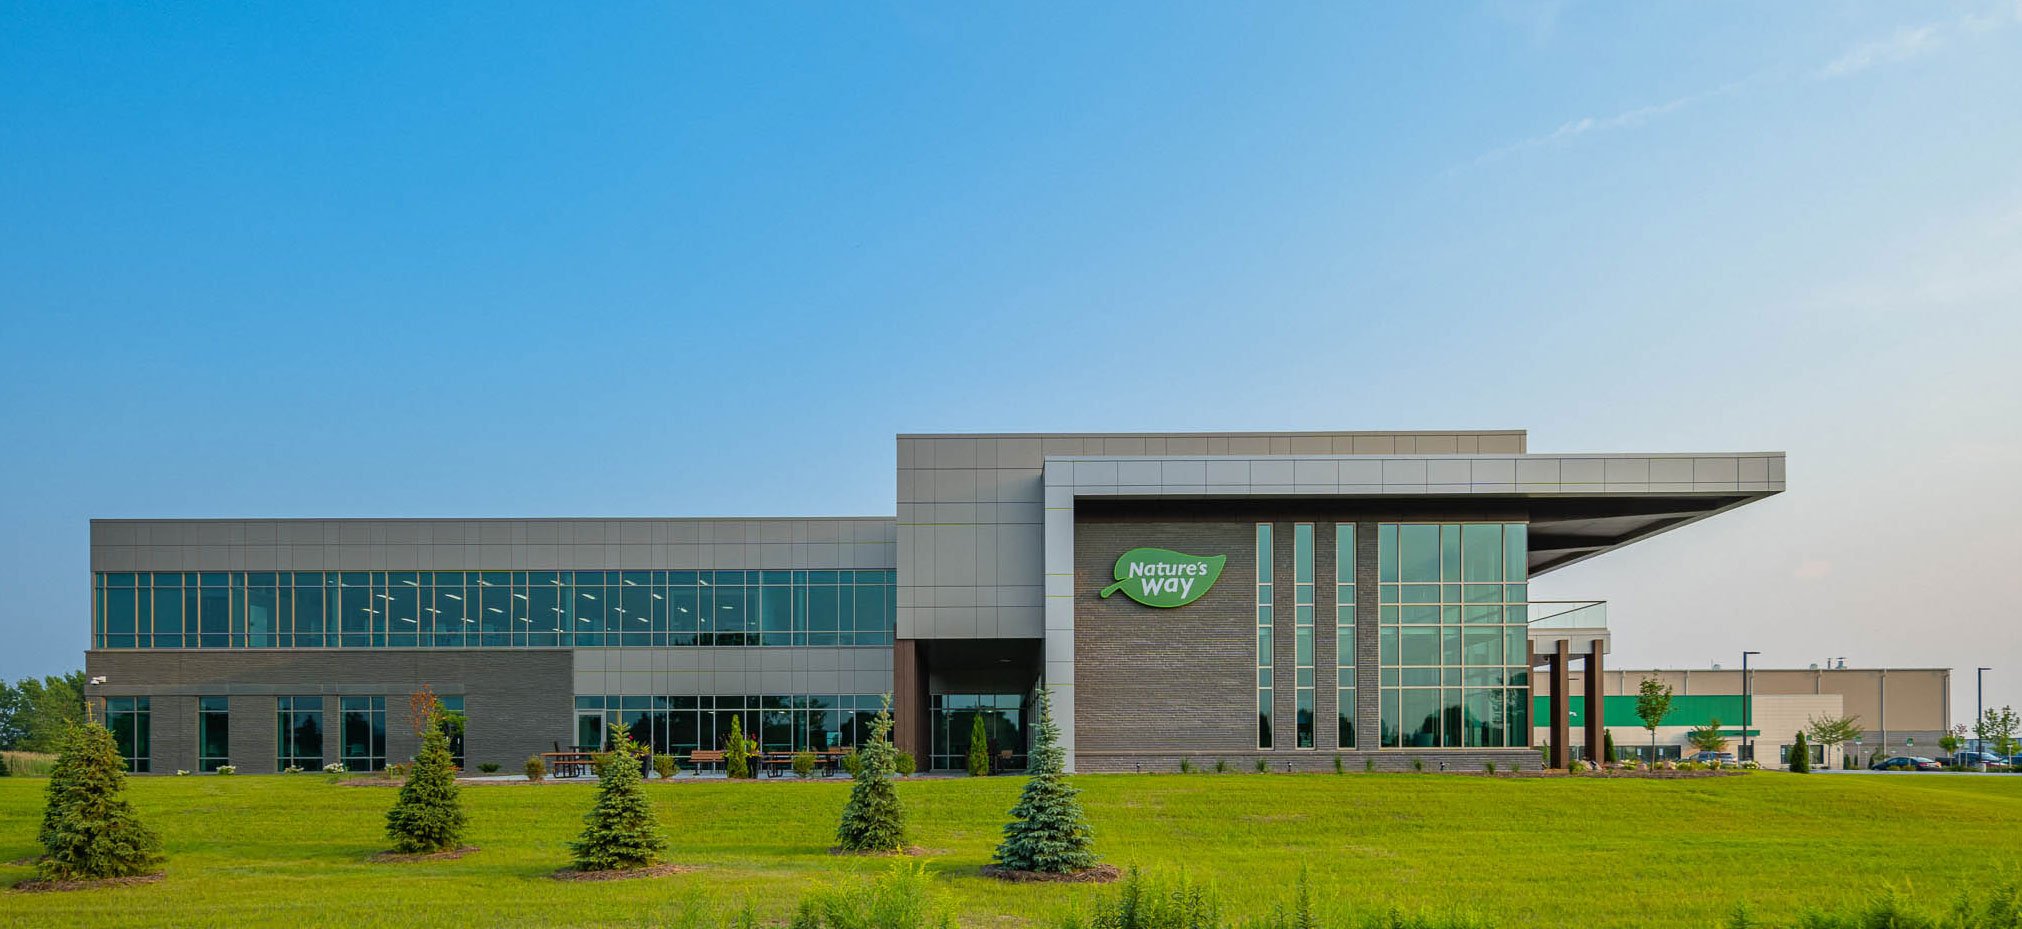 Nature's Way Corporate Office Building Project Green Bay, WI - Planning Design-Build Contractor C.D. Smith Construction Firm 